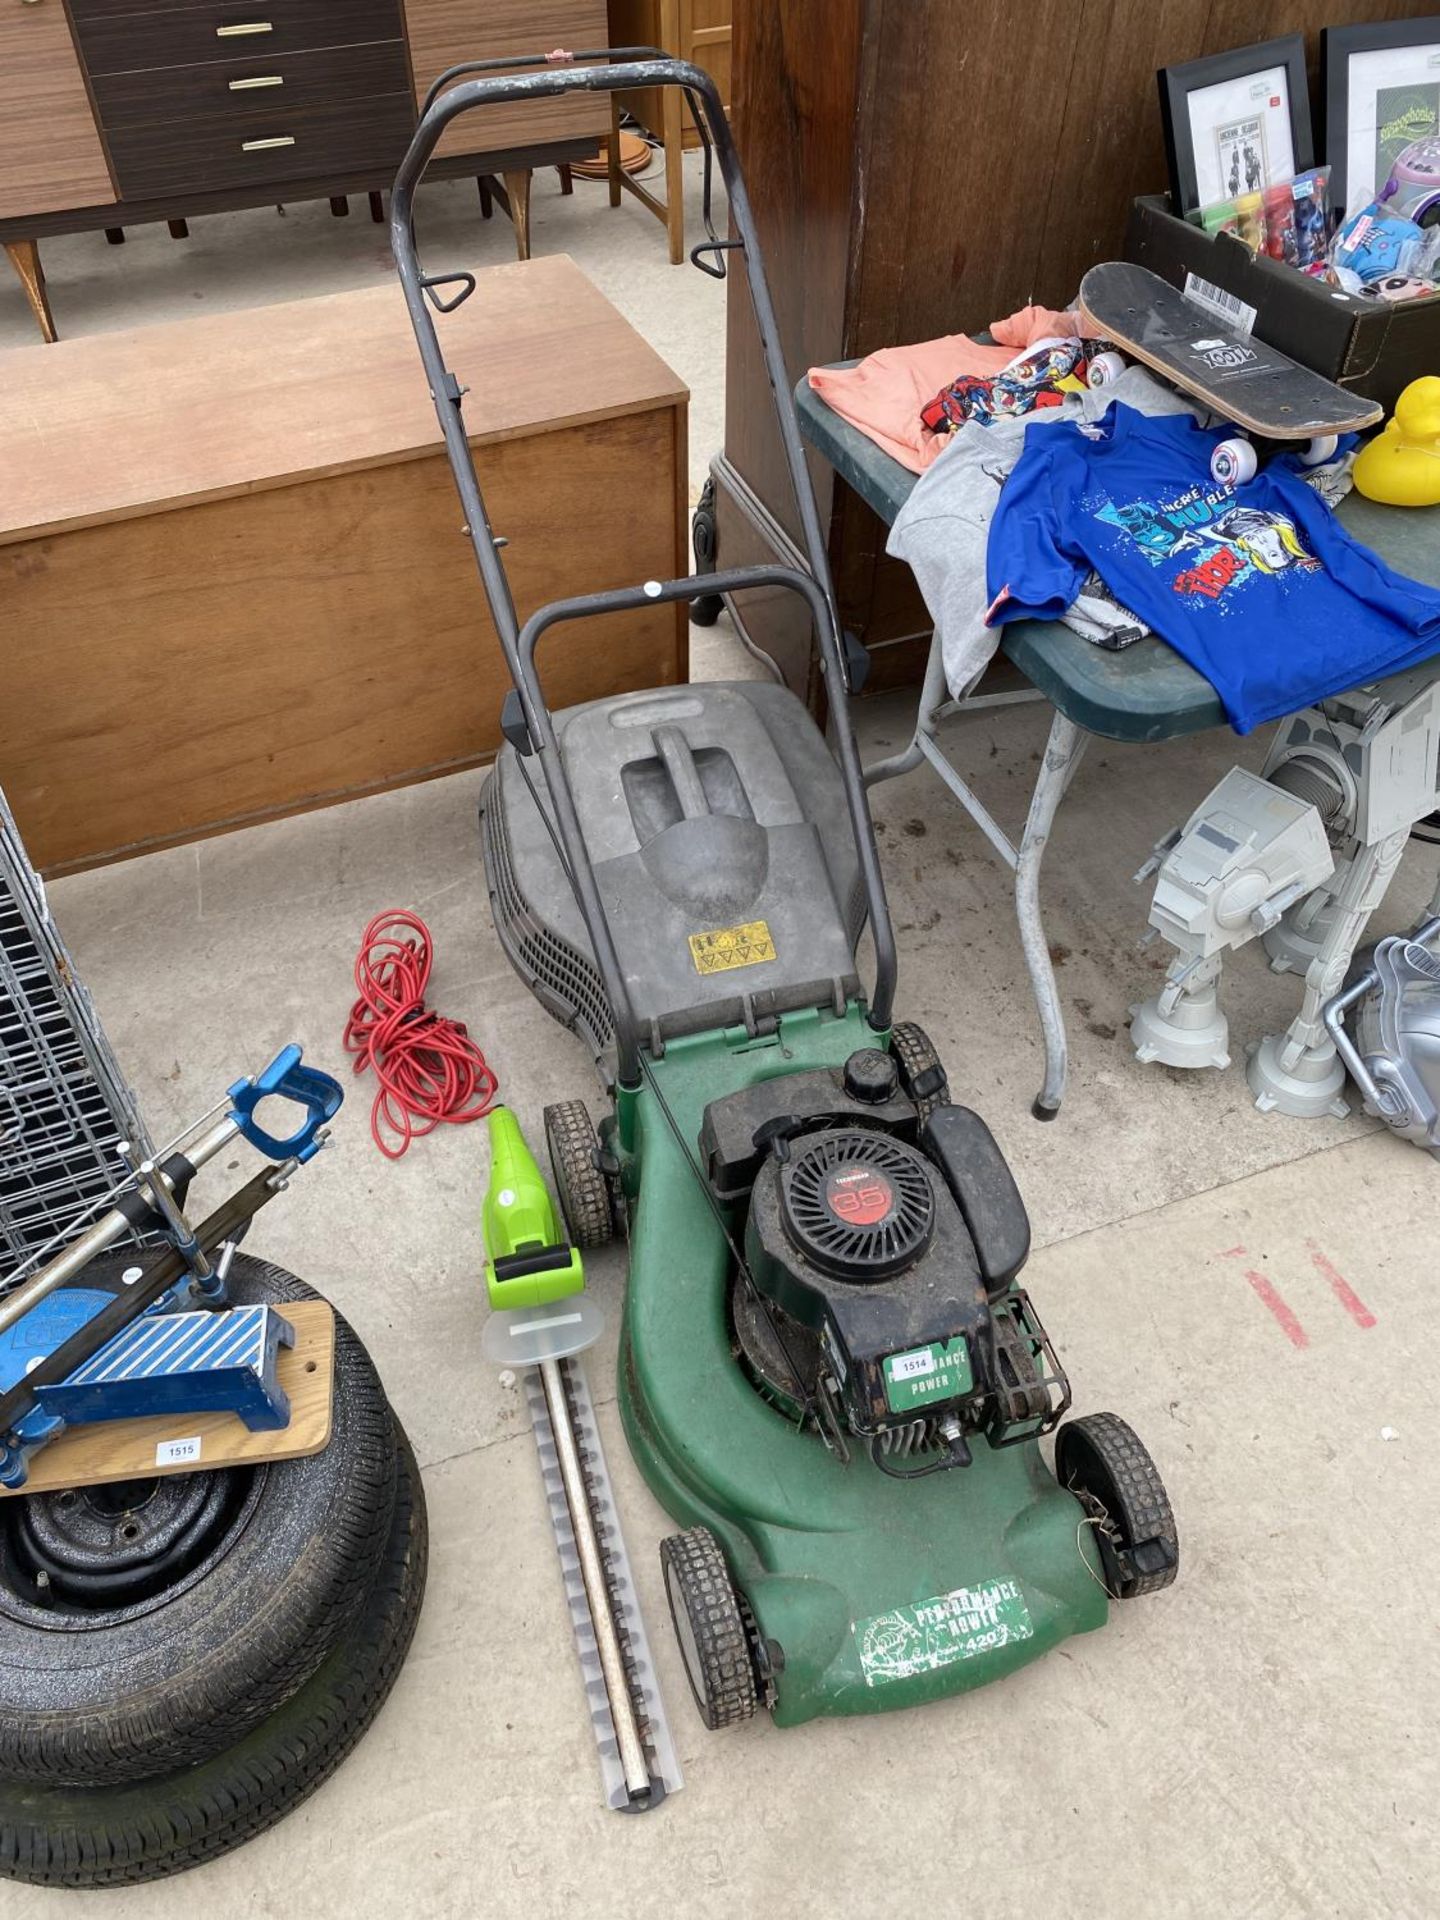 A PERFORMANCE POWER PWTROL LAWN MOWER AND AN ELECTRIC HEDGE TRIMMER